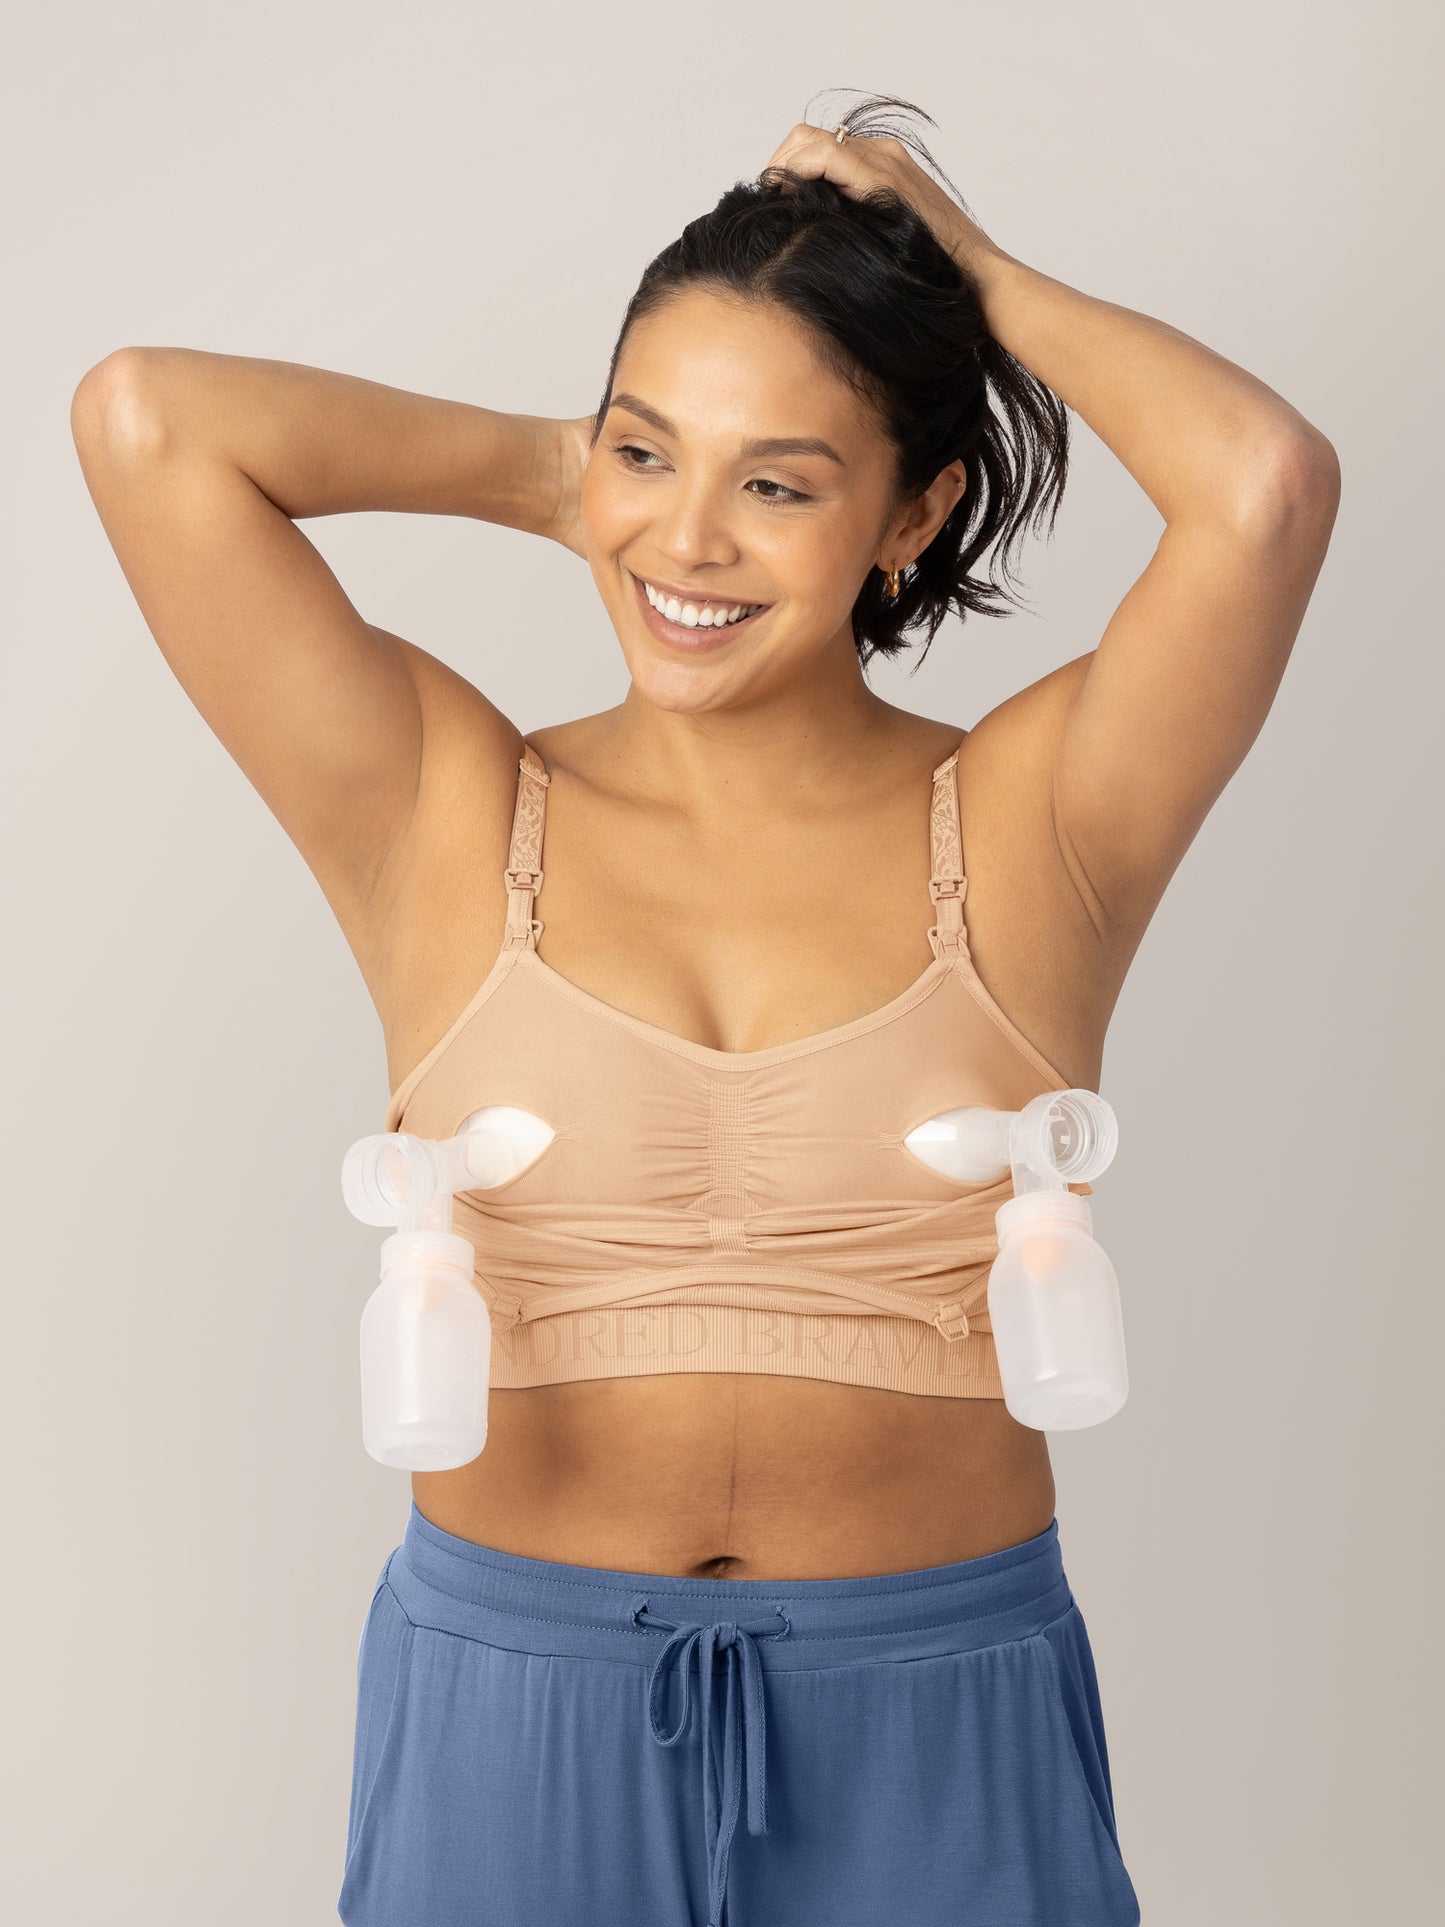 DIY Hands-Free Pumping Bra - Easy and Affordable